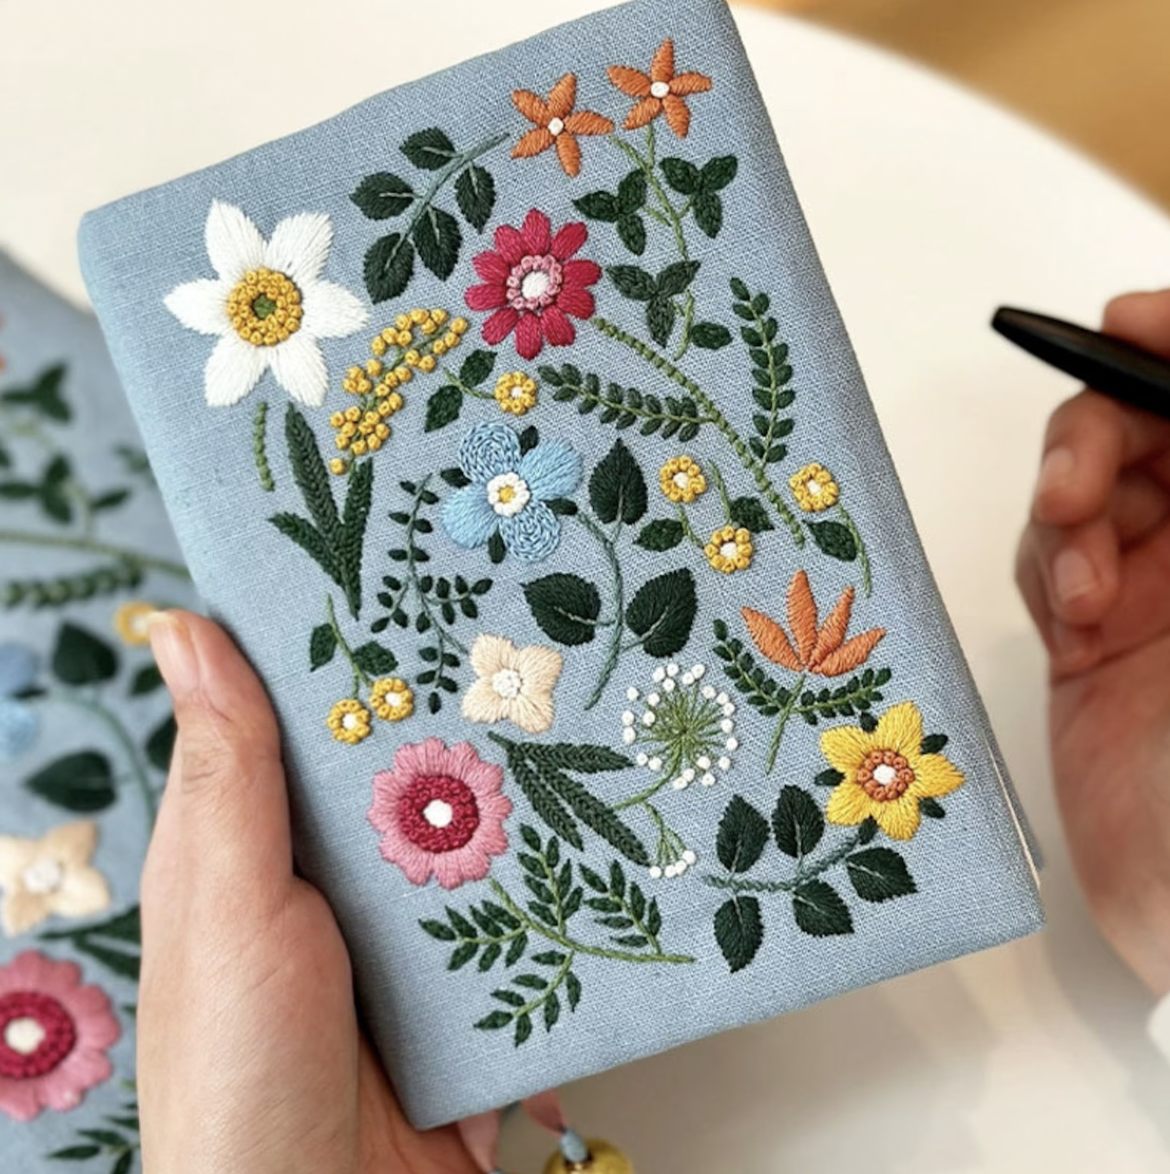 Image of a light blue fabric book cover with floral embroidery